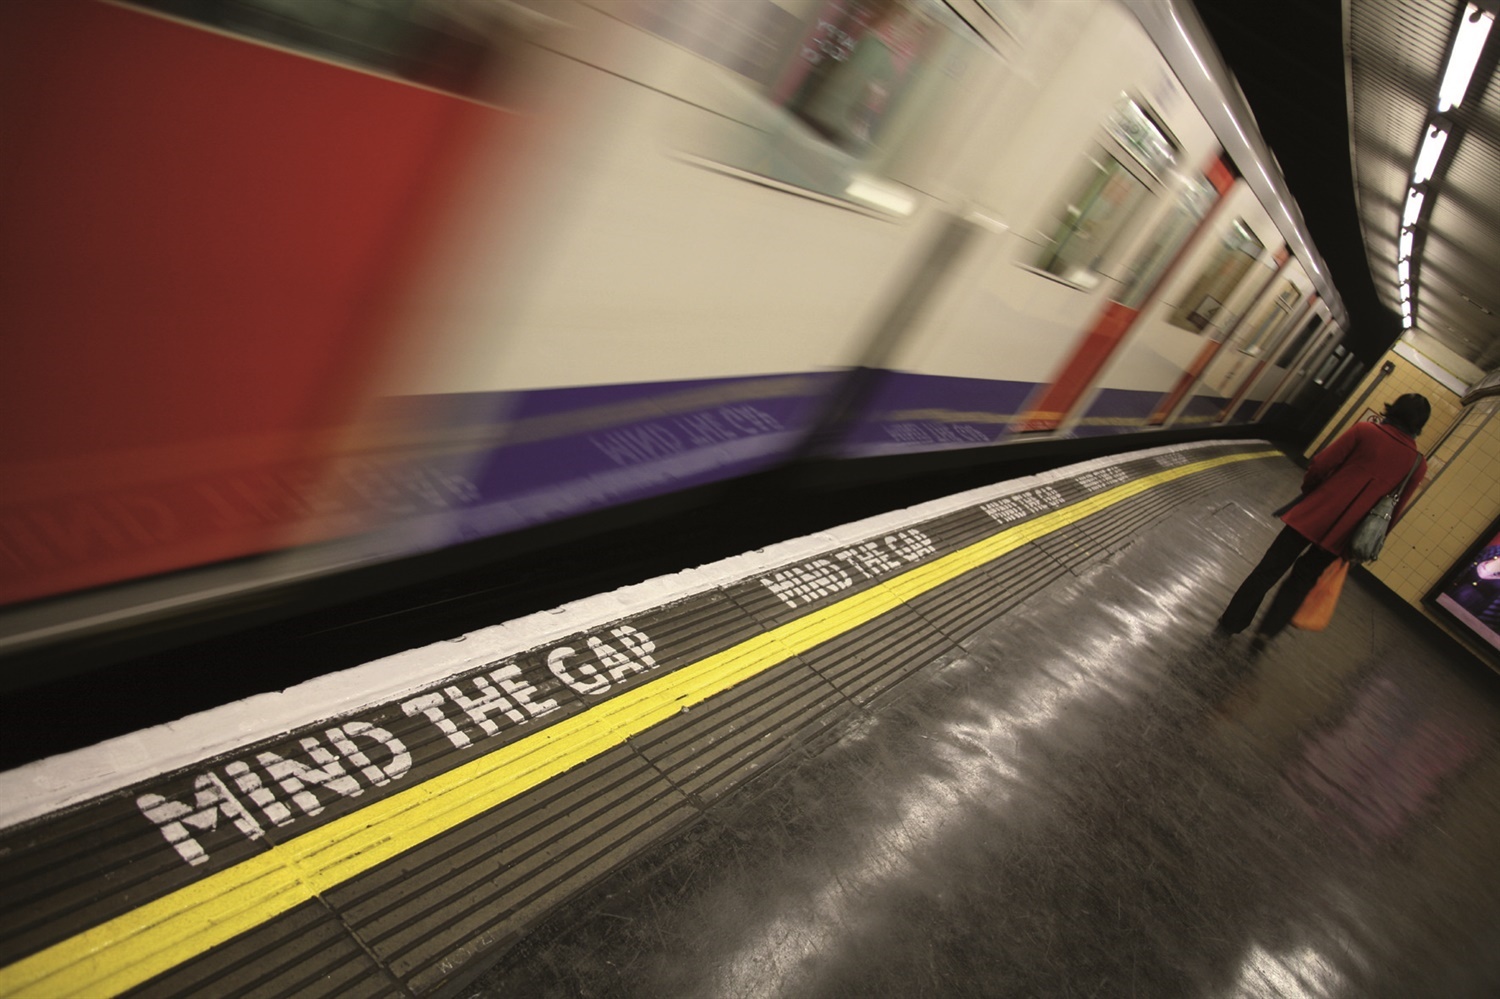 Union calls for TfL workforce review as staff cuts have ‘created a death trap’